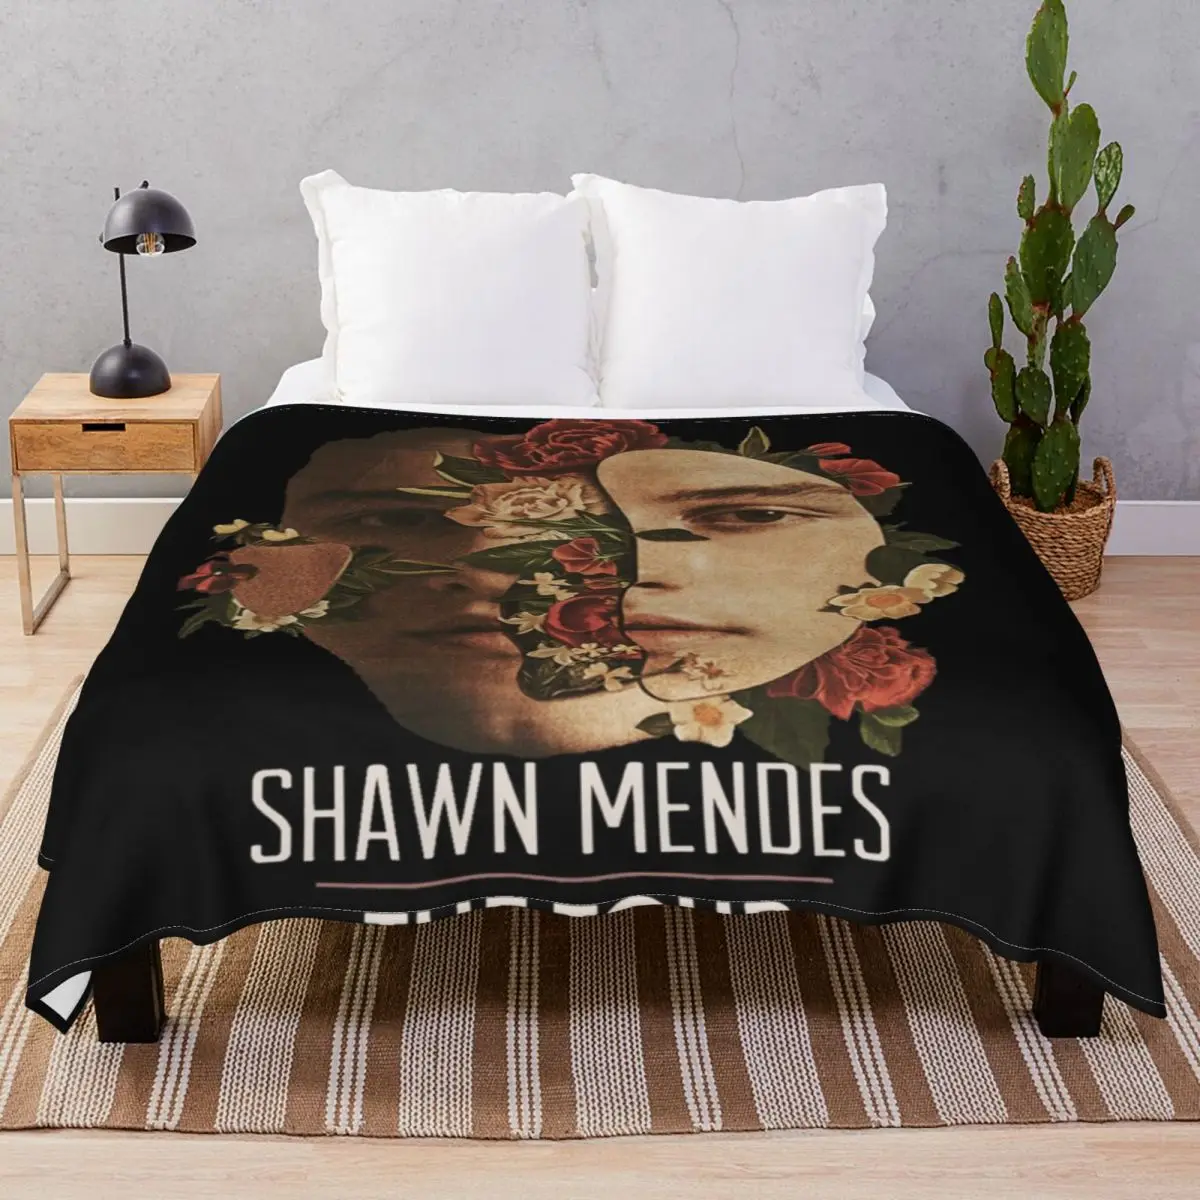 Duanu THE MENDES TOUR 2019 Blankets Fleece Plush Print Super Warm Throw Blanket for Bedding Sofa Camp Office